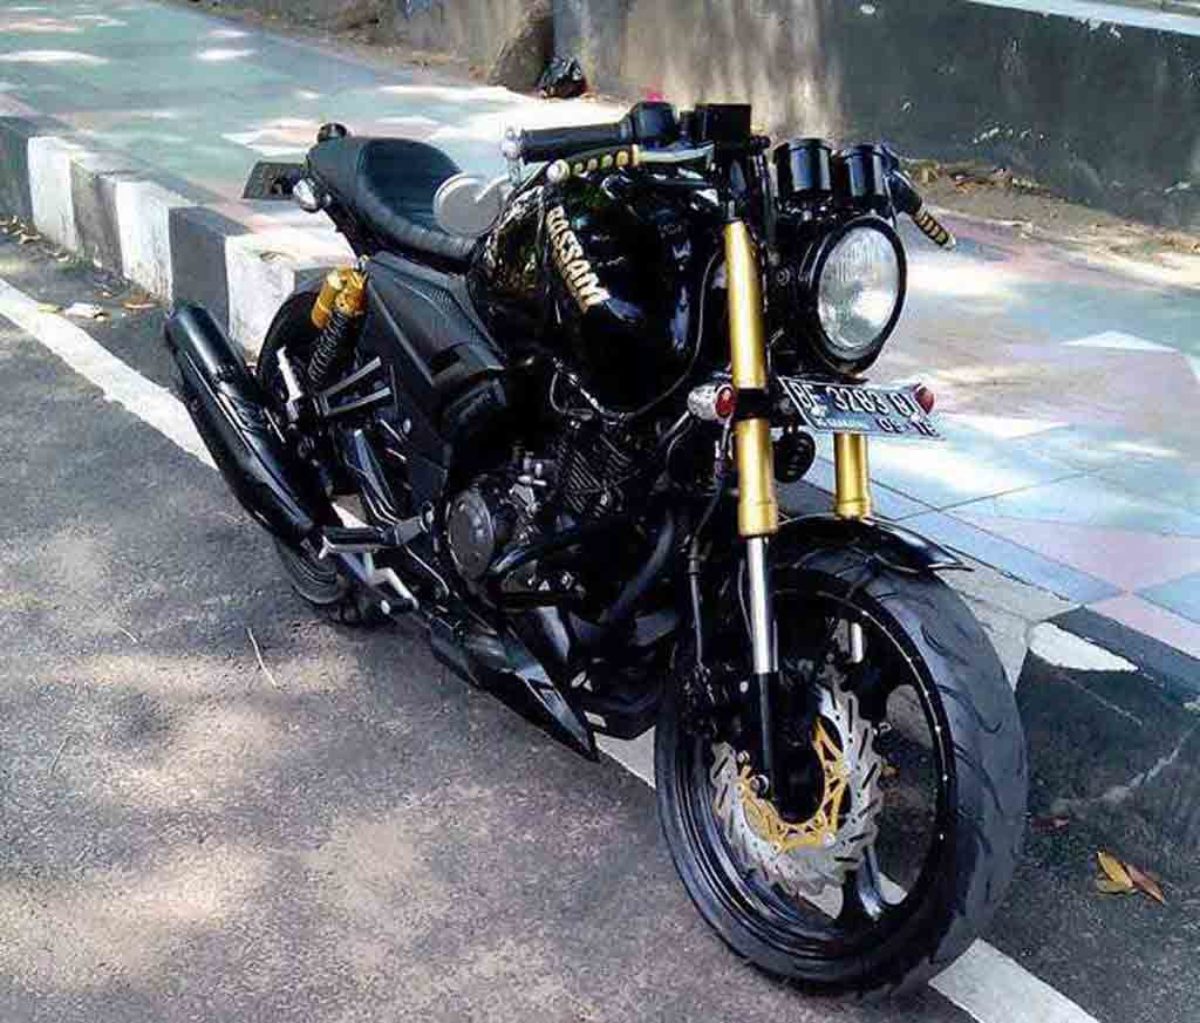 Customised Tvs Apache Rtr 180 Looks Very Aggressive In Cafe Racer Guise